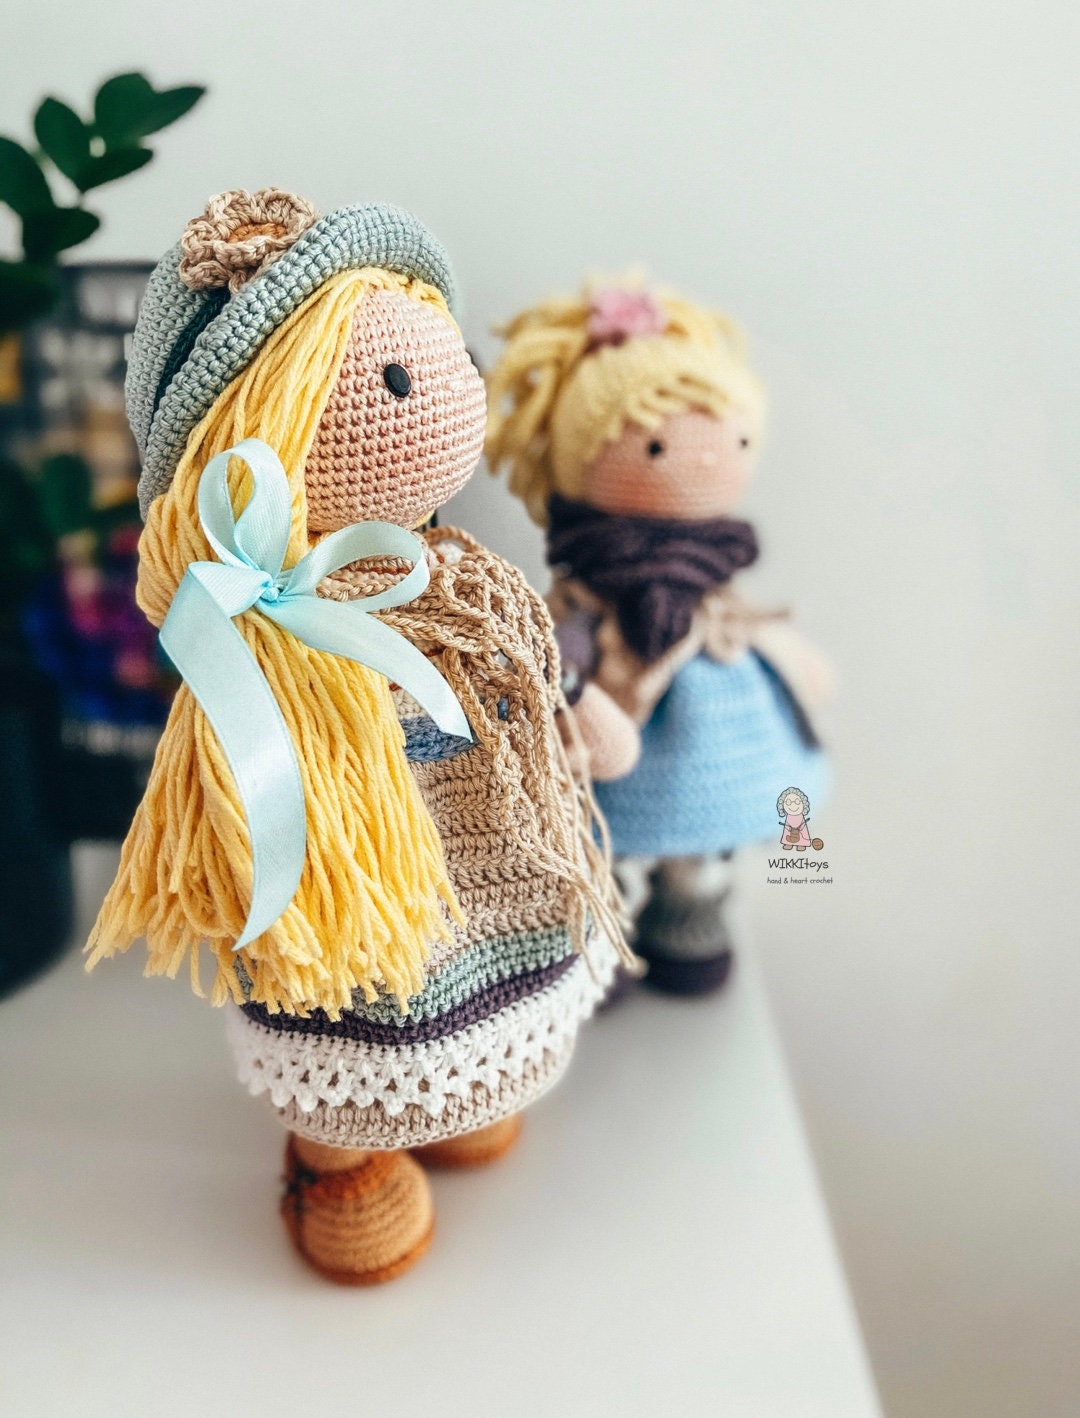 Luxury handmade doll with all the details Ideal gift for girls. Nice FREYA crochet doll